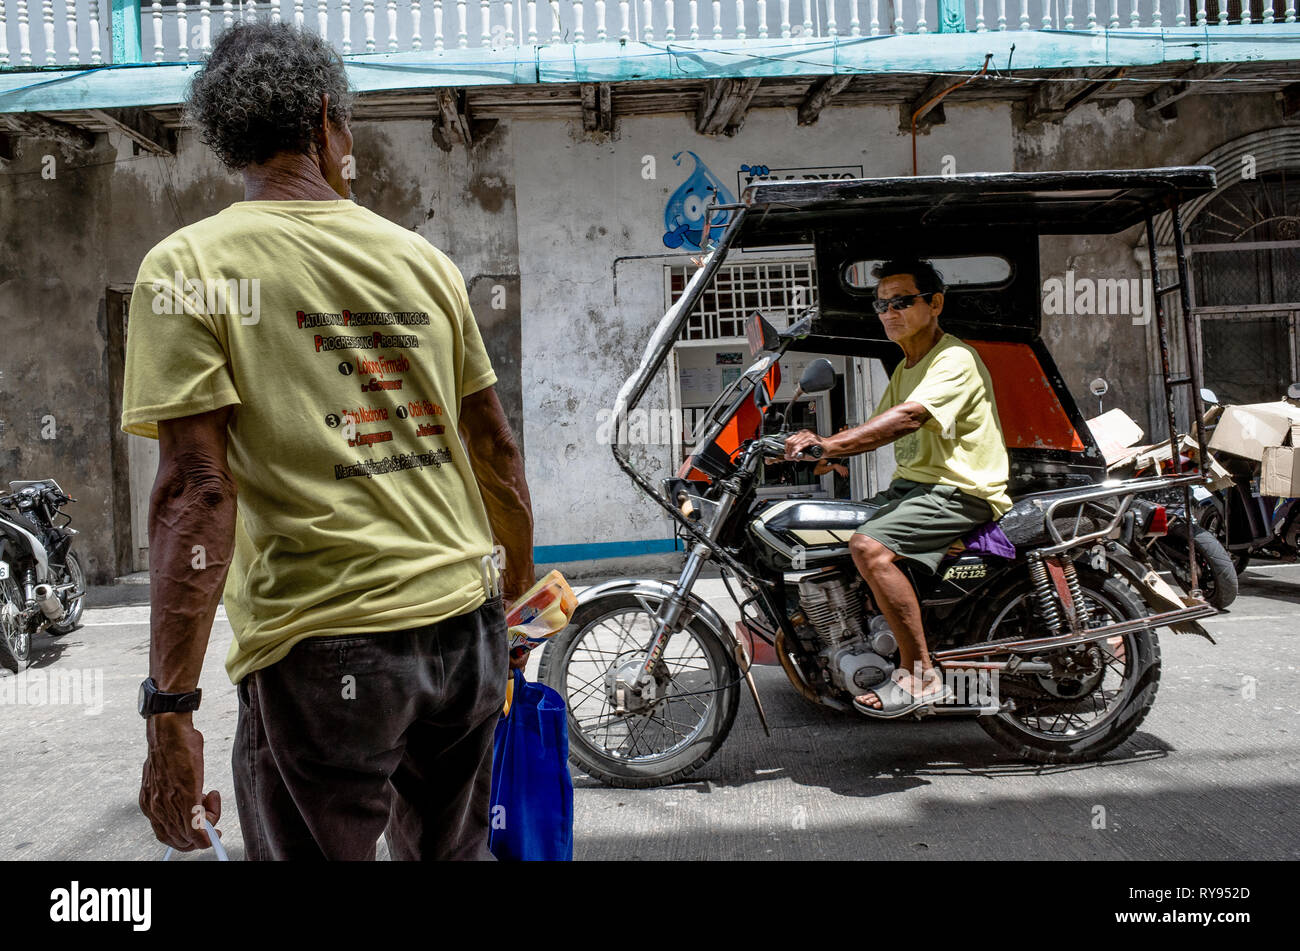 An elderly Filipino man watches a tricycle driver pass by on the street - Romblon City, Philippines Stock Photo